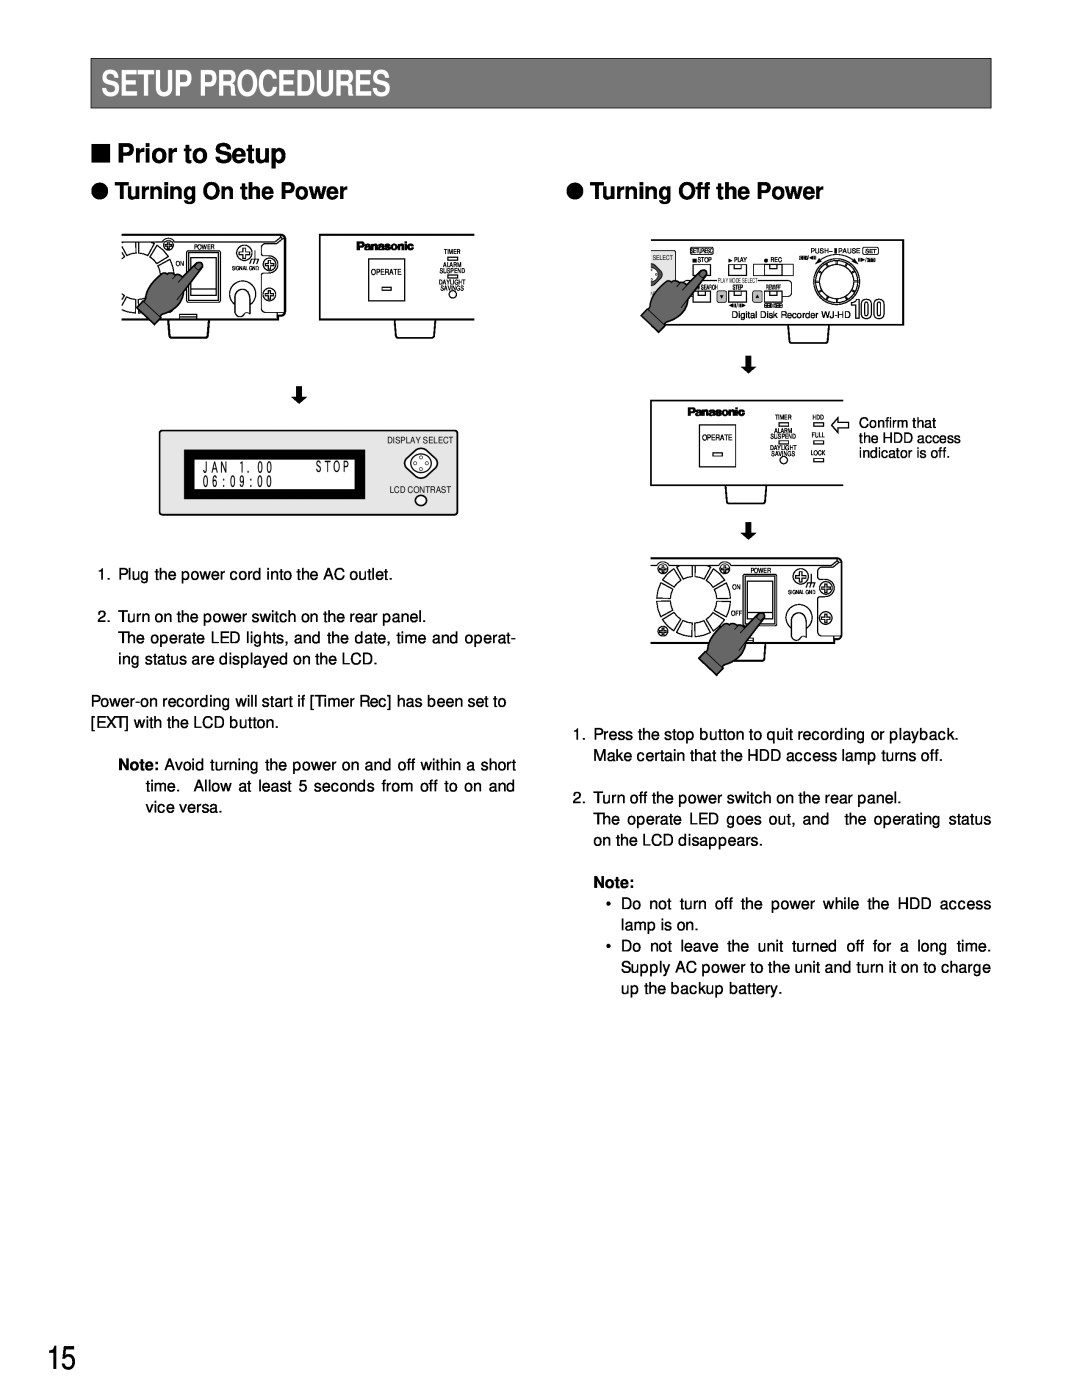 Panasonic WJ-HD100 operating instructions Setup Procedures, Prior to Setup, Turning On the Power, Turning Off the Power 